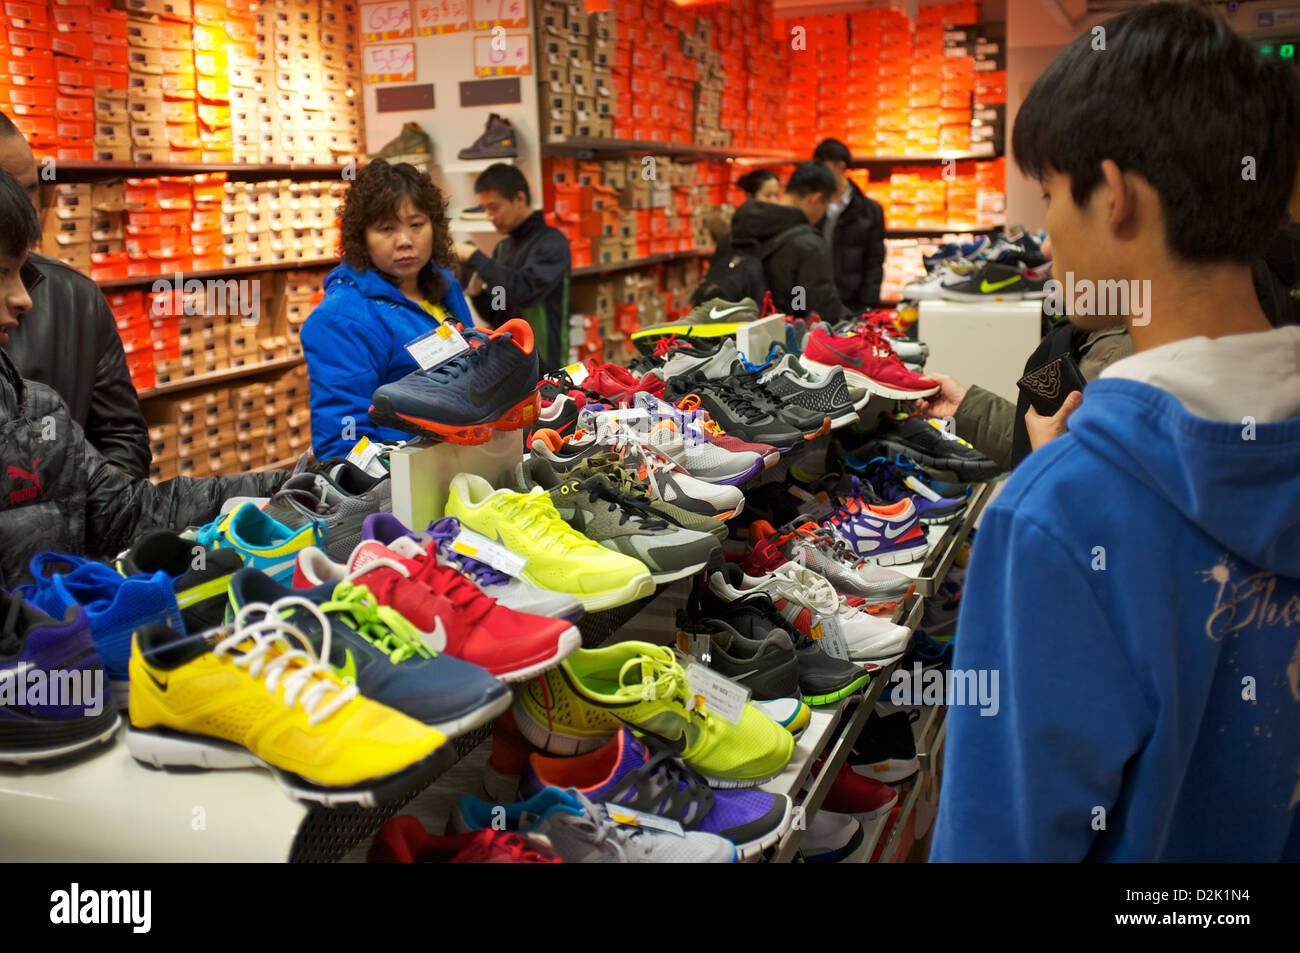 Nike Shoe High Resolution Stock Photography and Images - Alamy